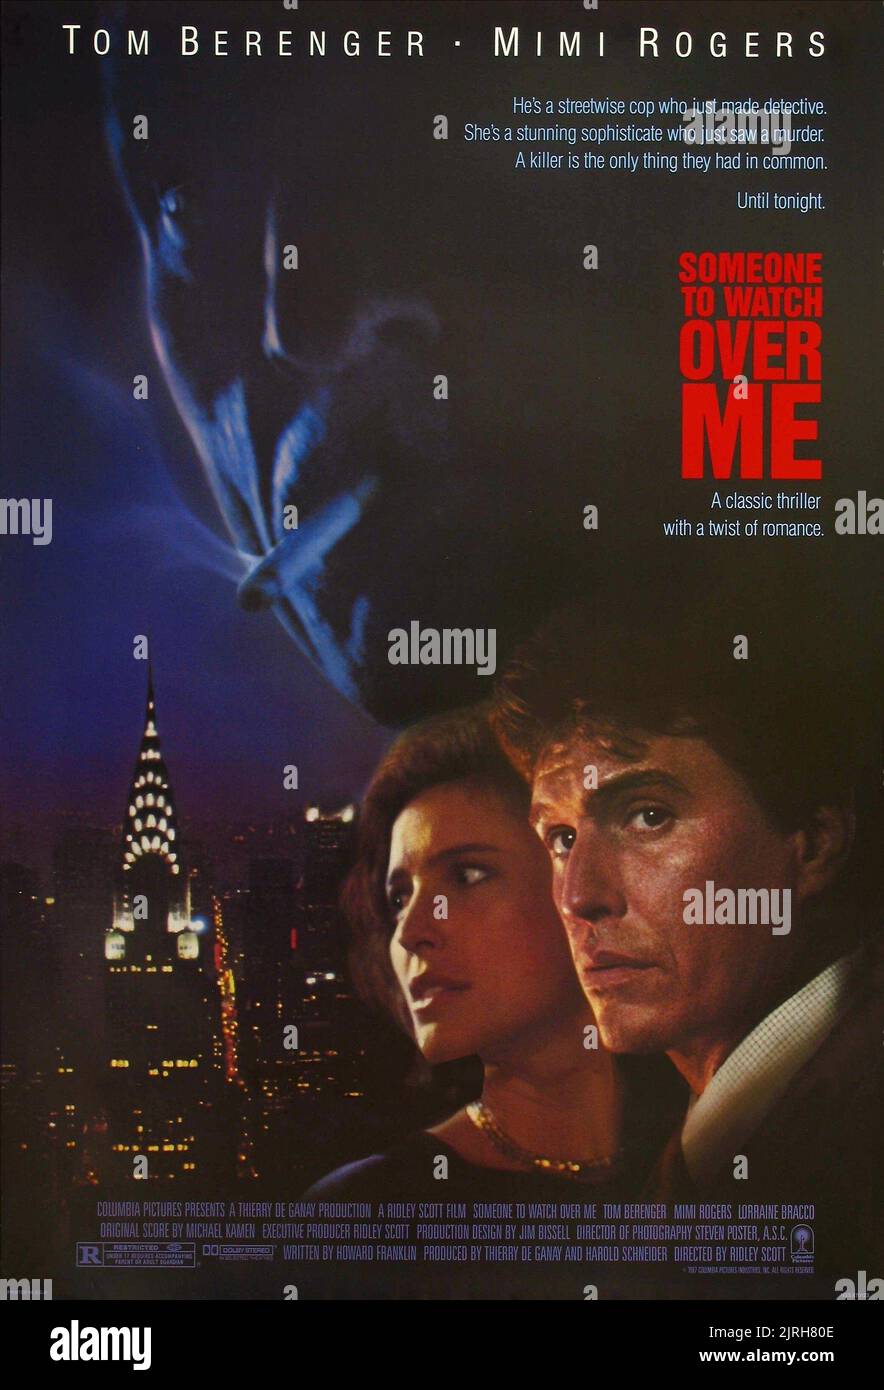 TOM BERENGER, MIMI ROGERS POSTER, SOMEONE TO WATCH OVER ME, 1987 Stock Photo